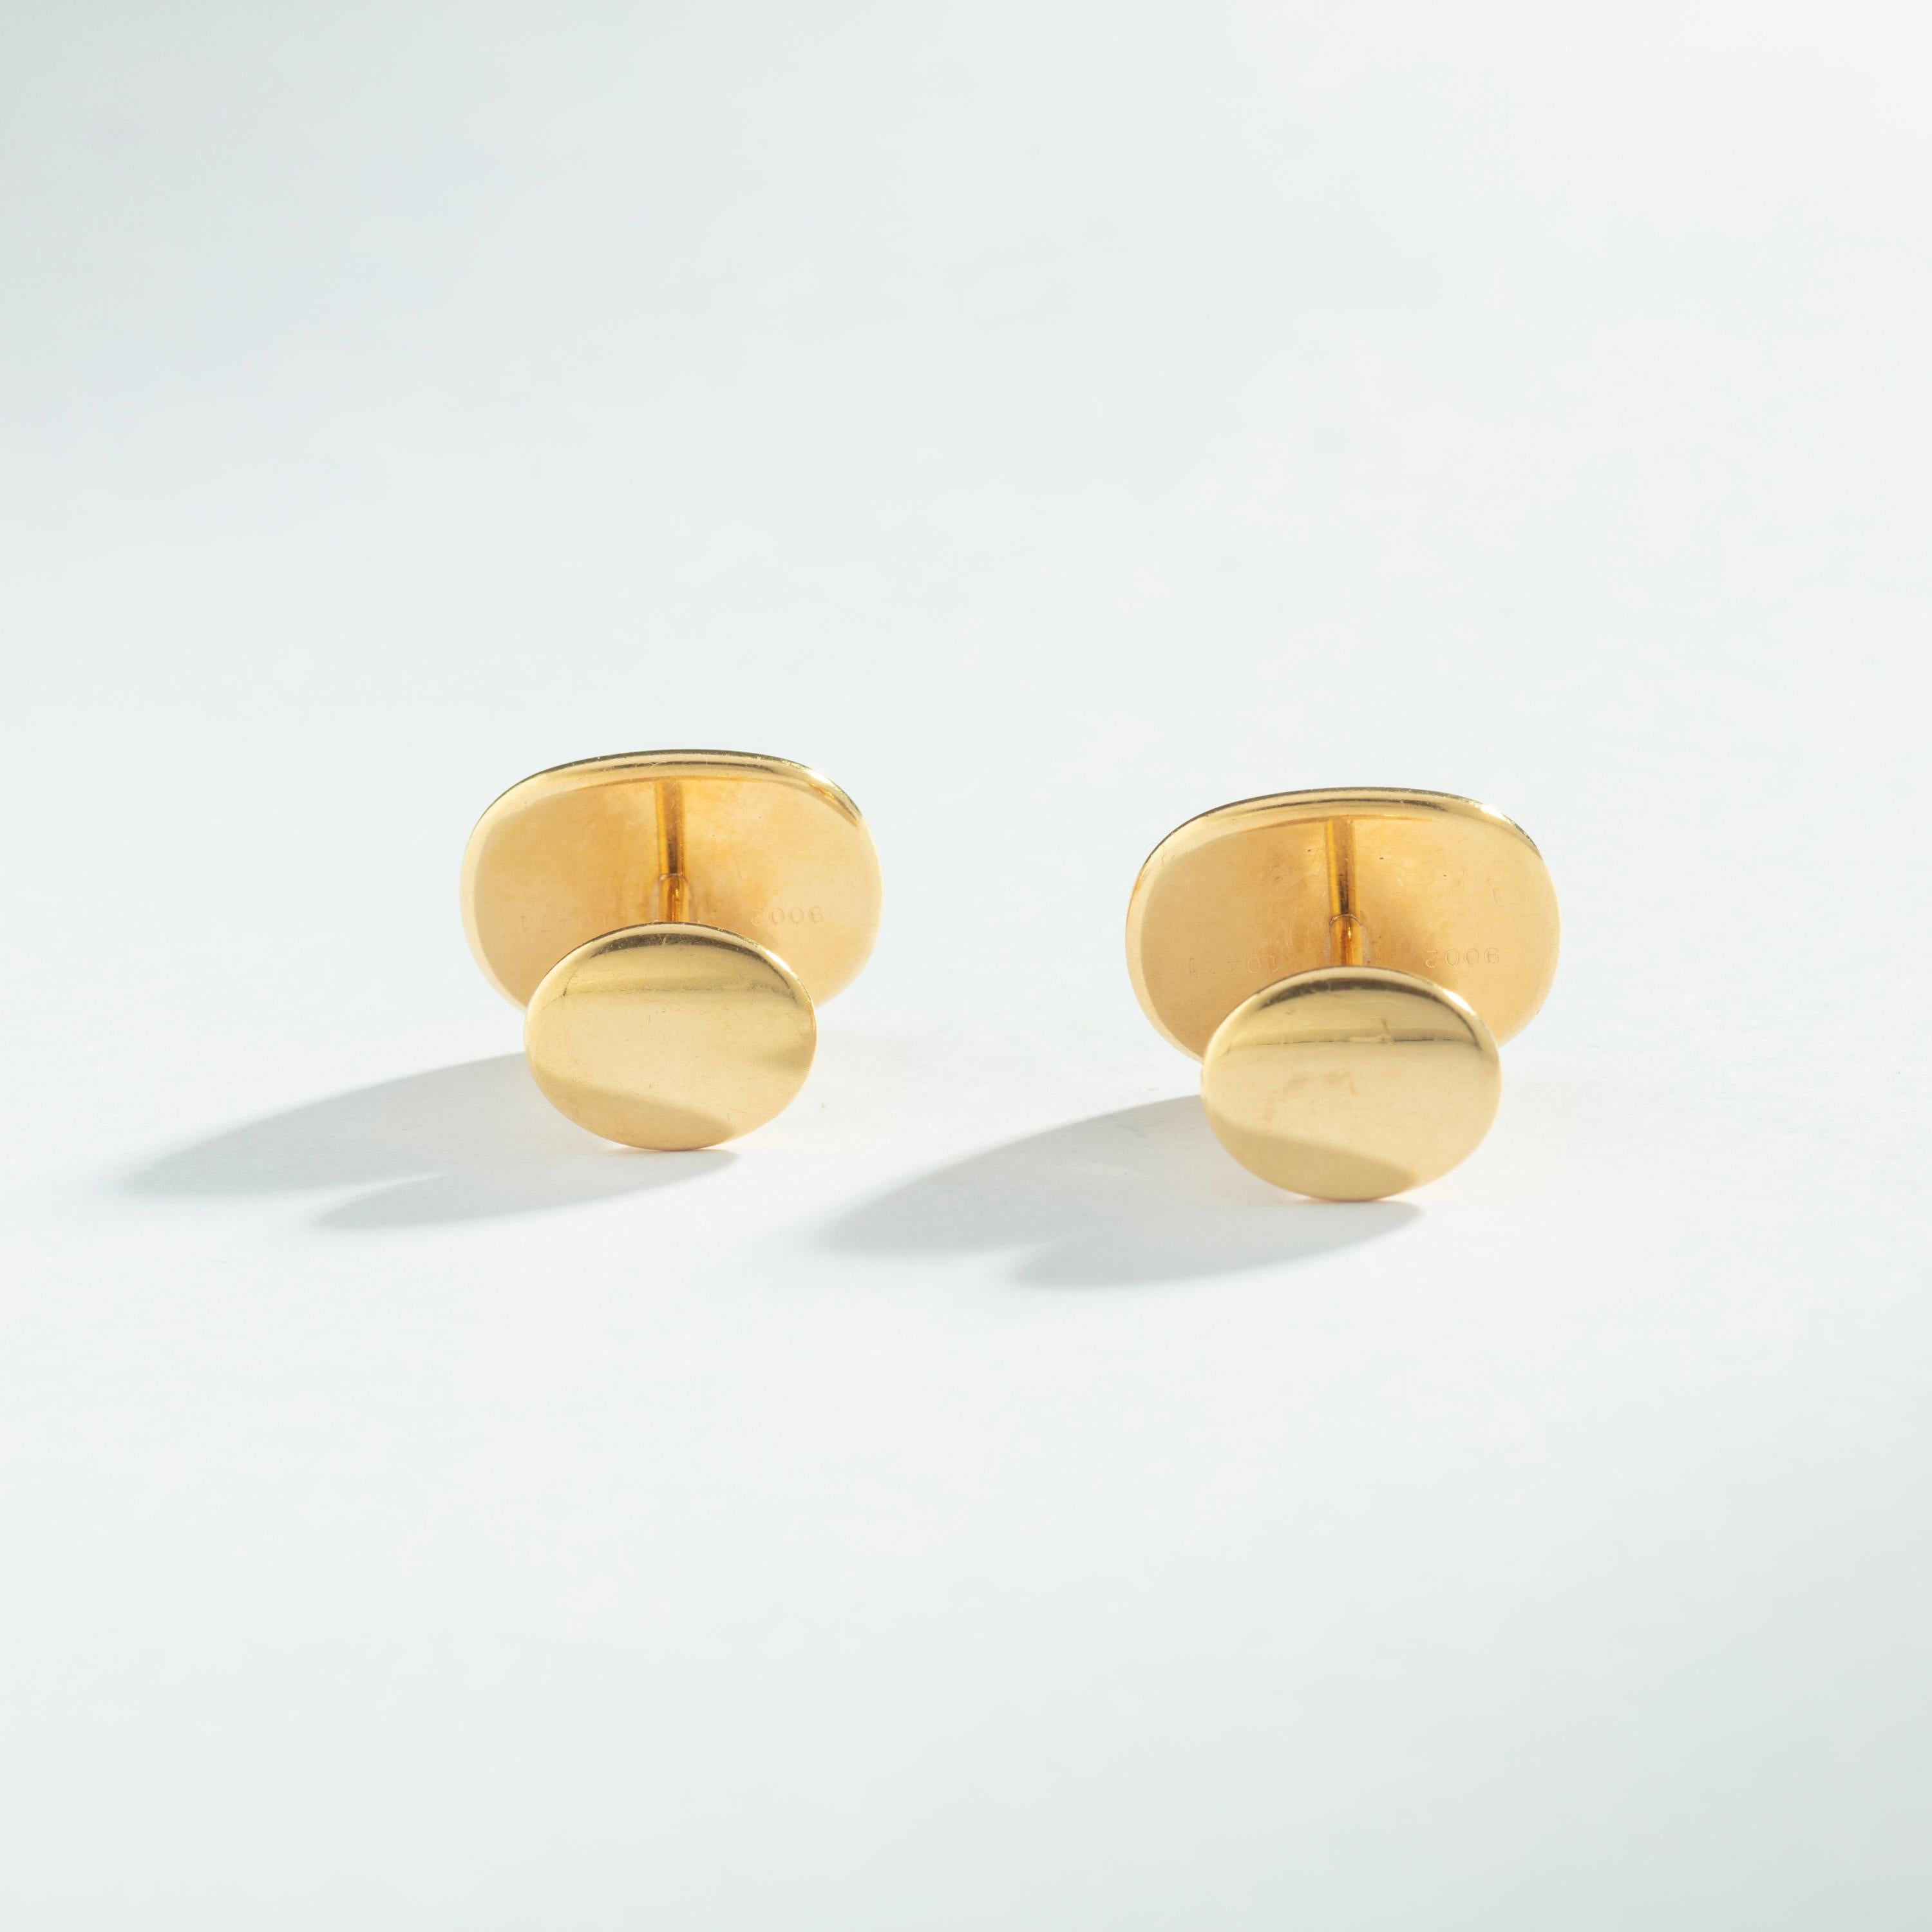 Patek Philippe Ellipse Yellow Gold 18k Cufflinks 1970S.
Largest size. 

Handsome 18K yellow gold cufflinks from the Ellipse collection by Patek Philippe. These are the largest size available and feature a sharp blue sunburst face. Refined and